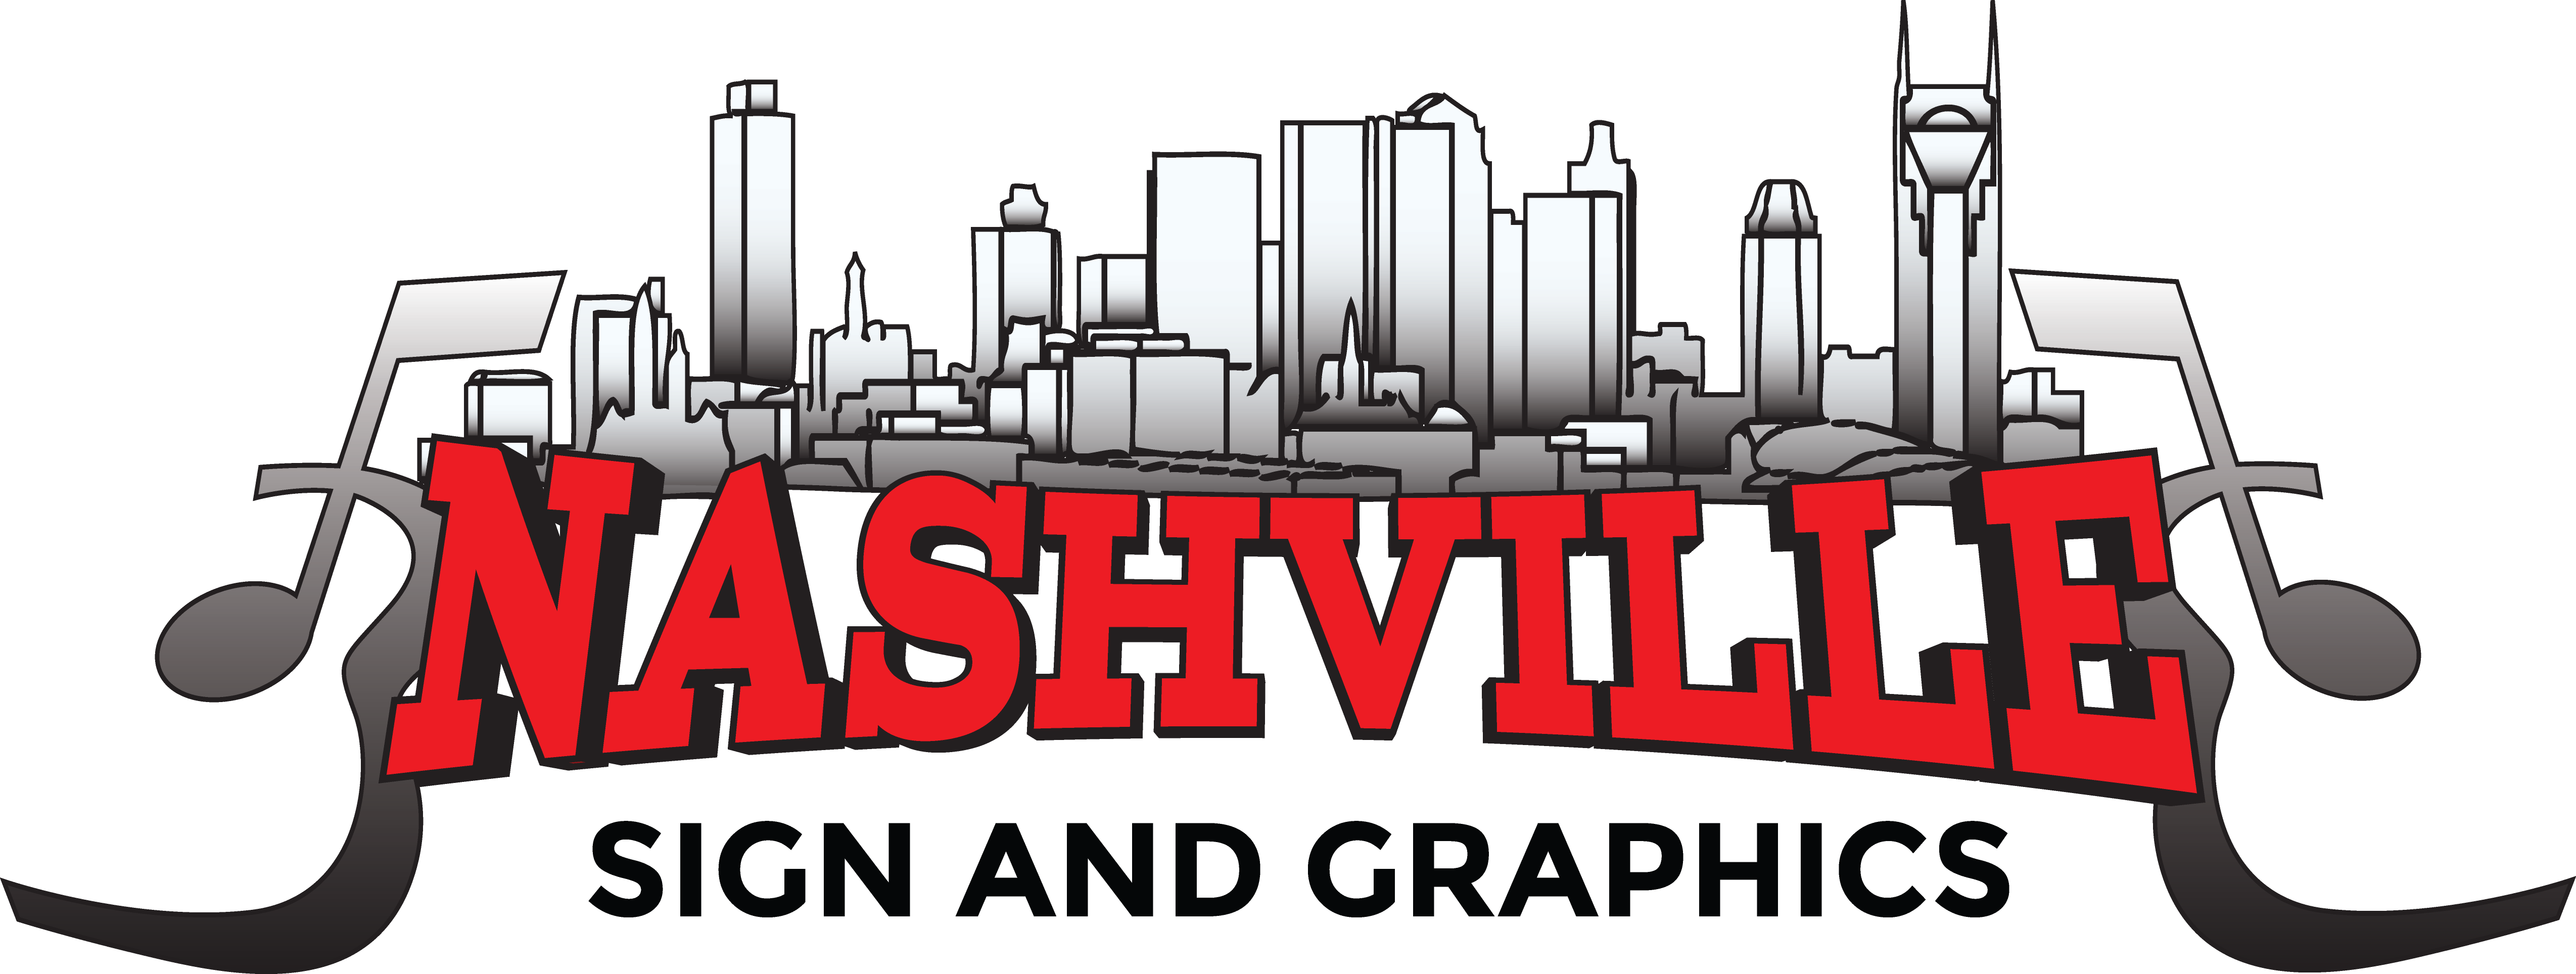 Top Images For Nashville Predators Car Decal On Picsunday - Nashville Sign And Graphics (5097x1927)